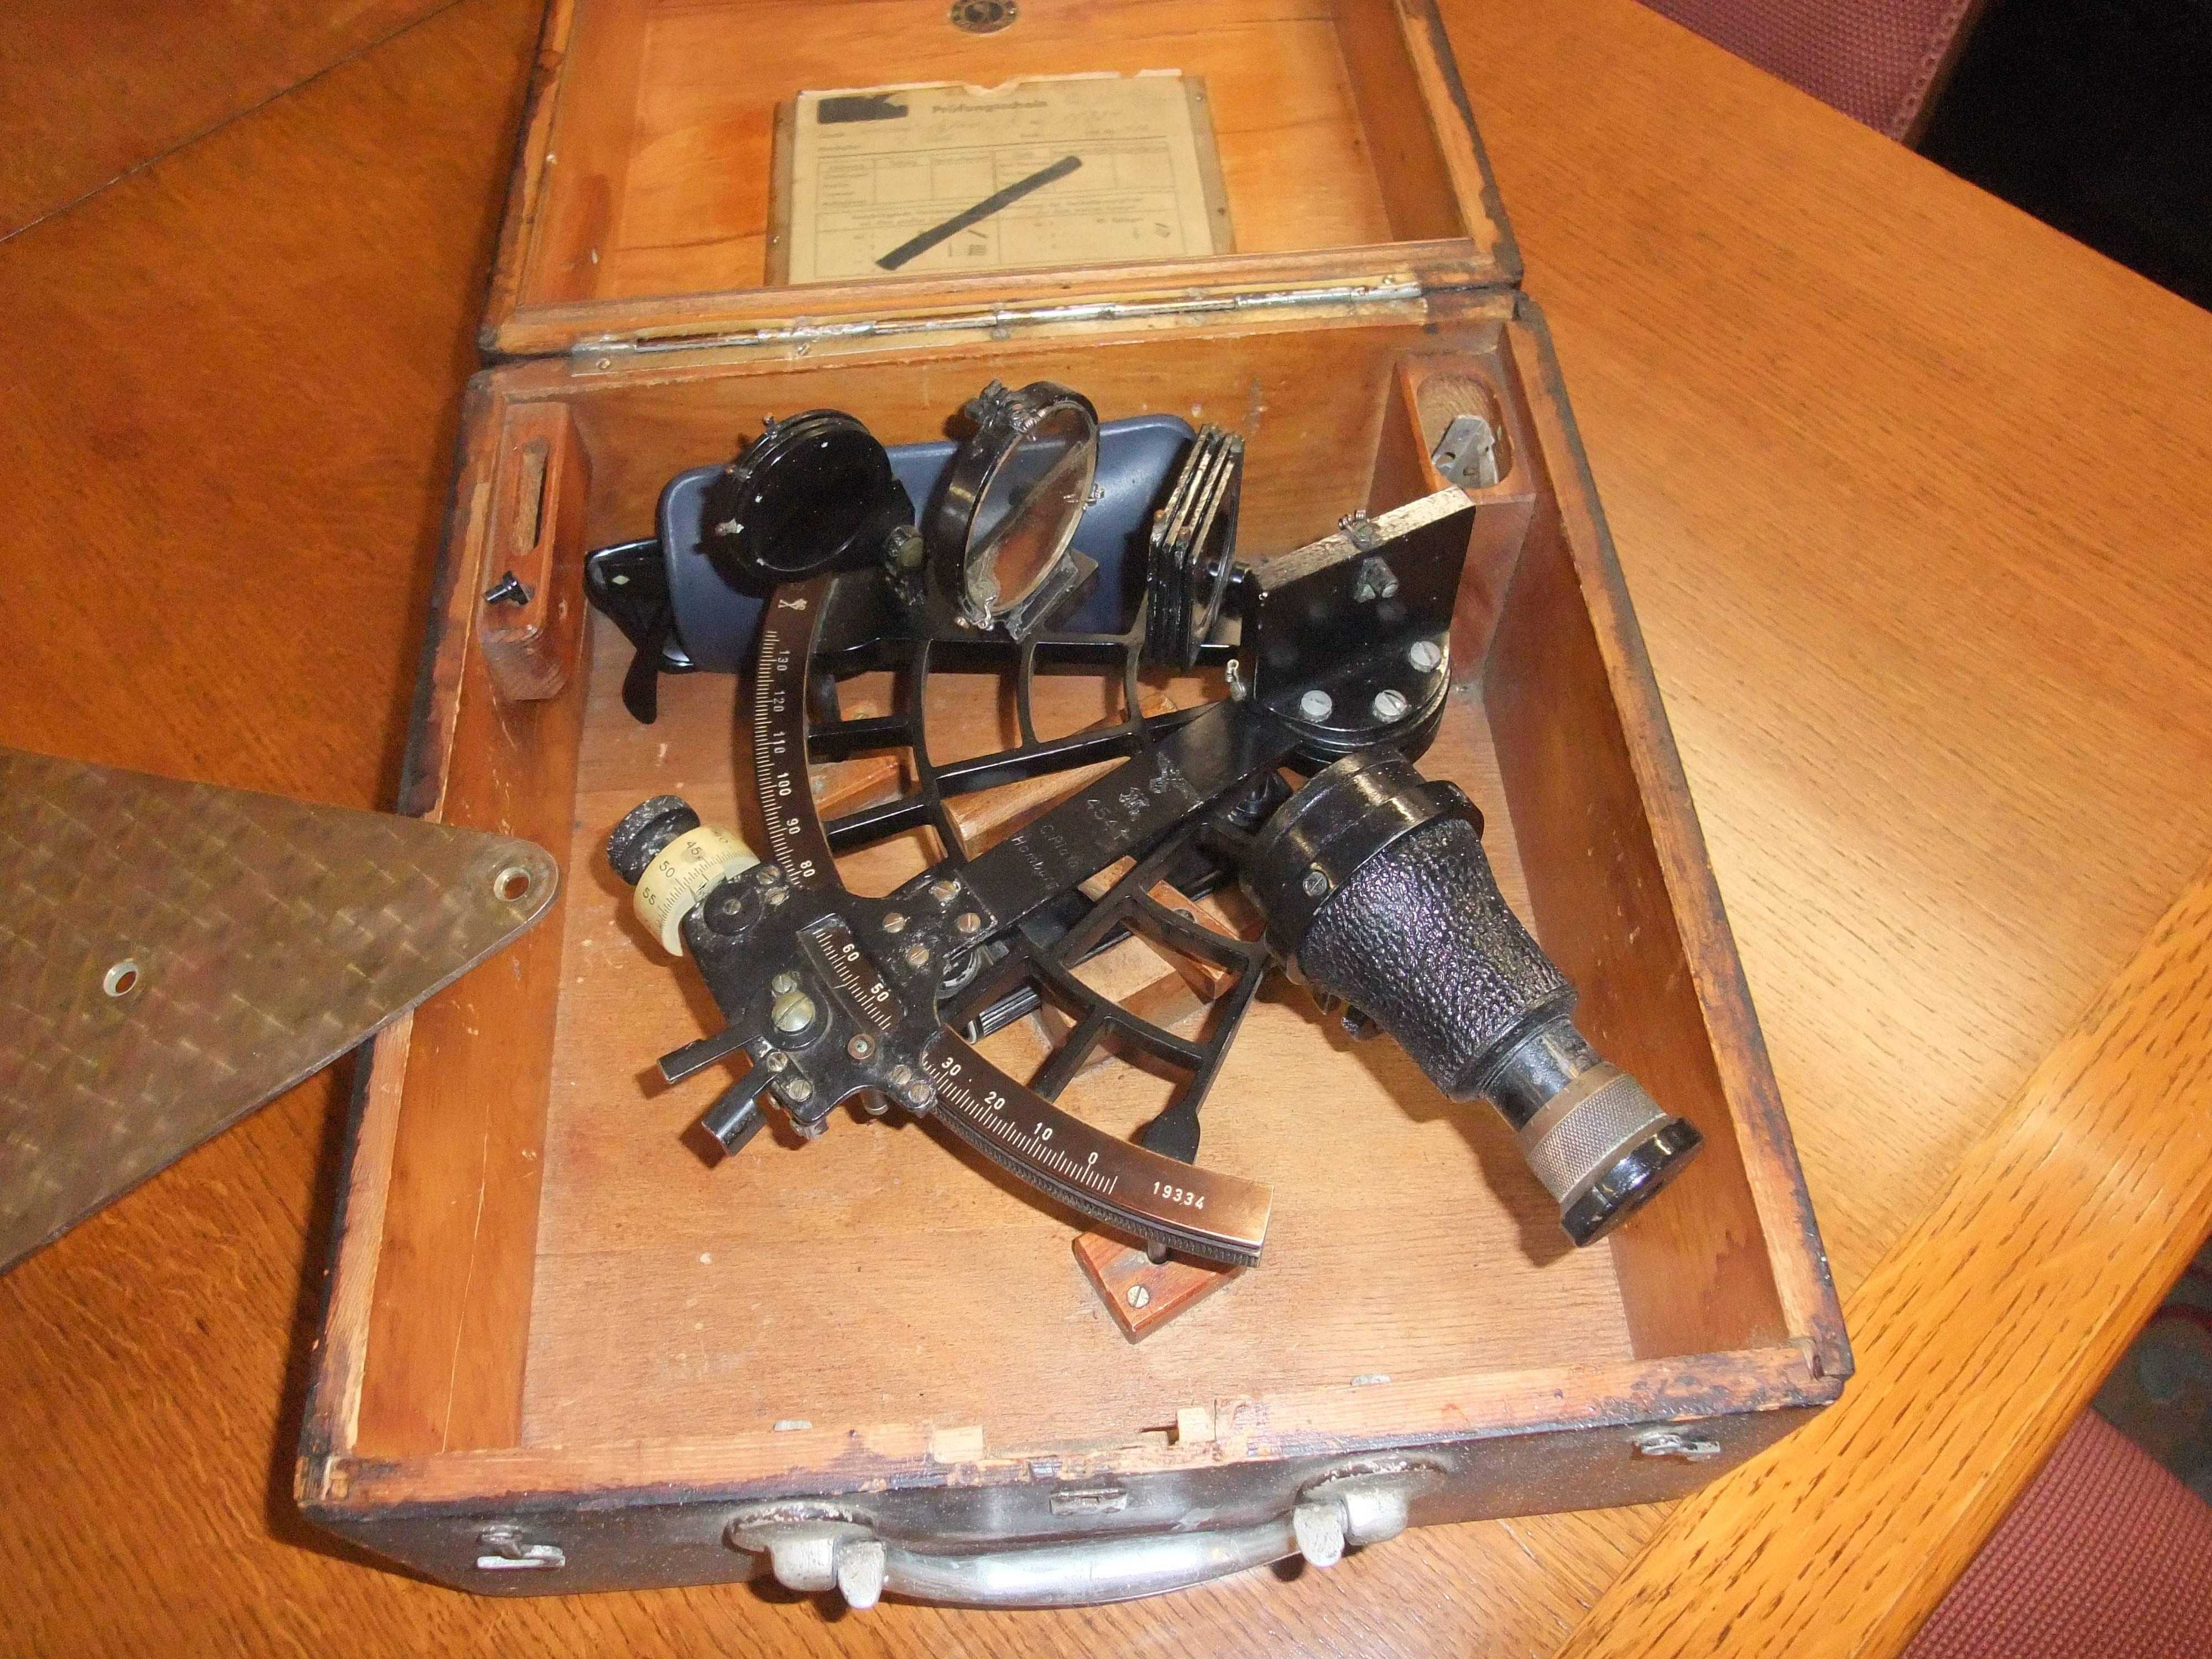 German sextant by C.Plath manufactured in August 1943, Bears nazi insignia and invoice with matching serial numbers. Believed to have been taken from a ship which surrendered at the neutral port of Dublin in 1945. Later used on the SS Madras City,